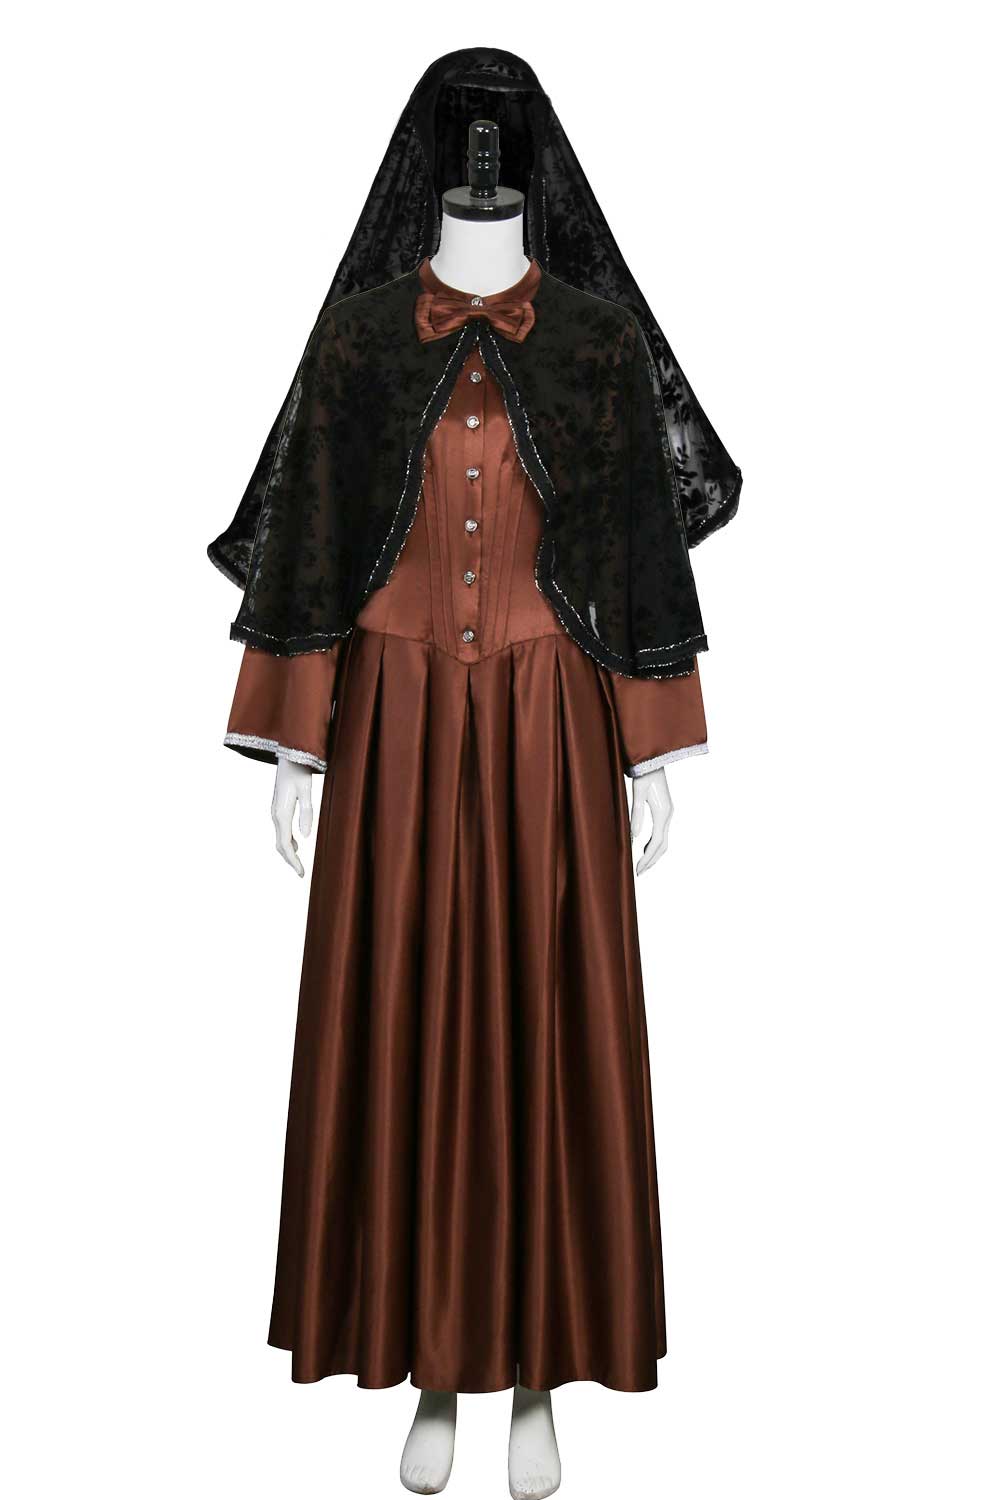 https://www.takerlama.com/little-women-mrsmarch-cosplay-costume-outfits-p0486.html